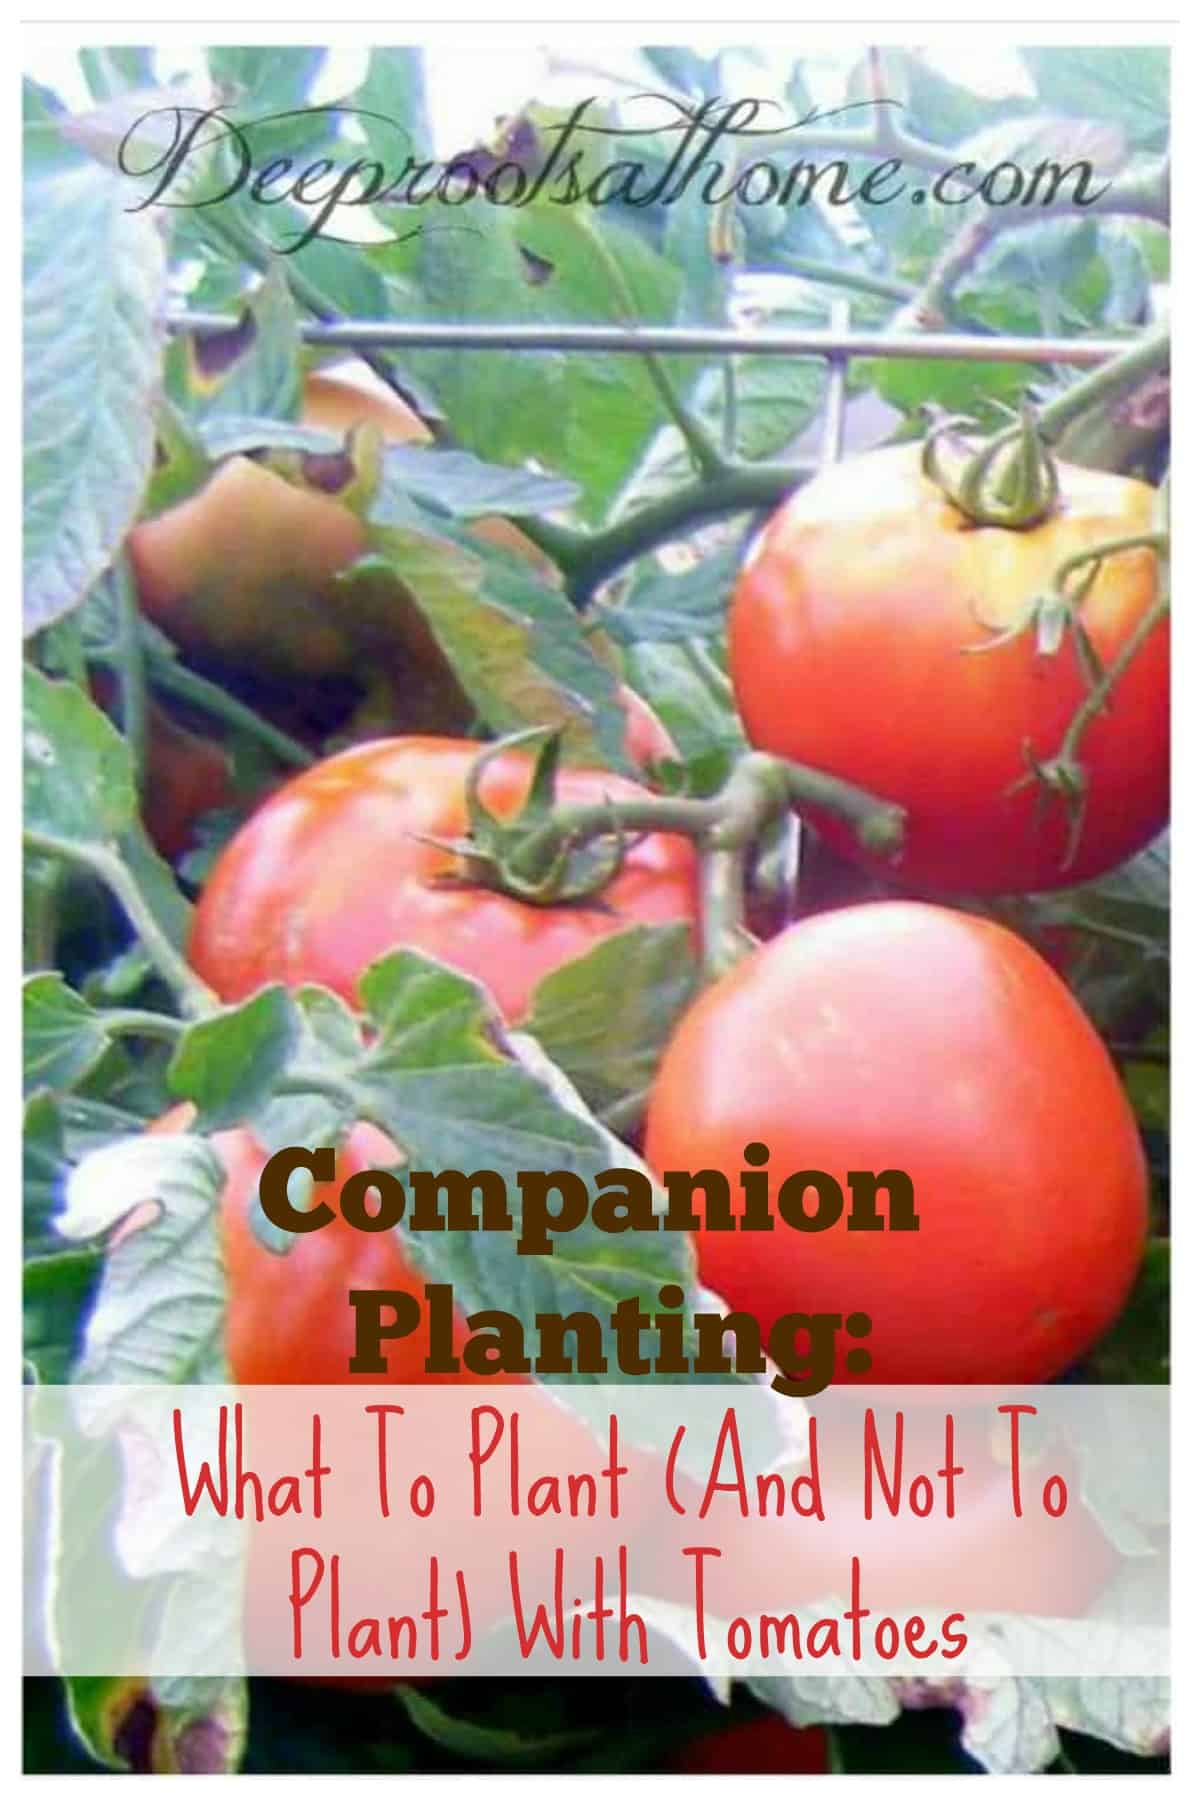 Companion Planting: What To Plant (& Not Plant) With Tomatoes. Ripe tomatoes on the vine and companion plants to grow nearby.